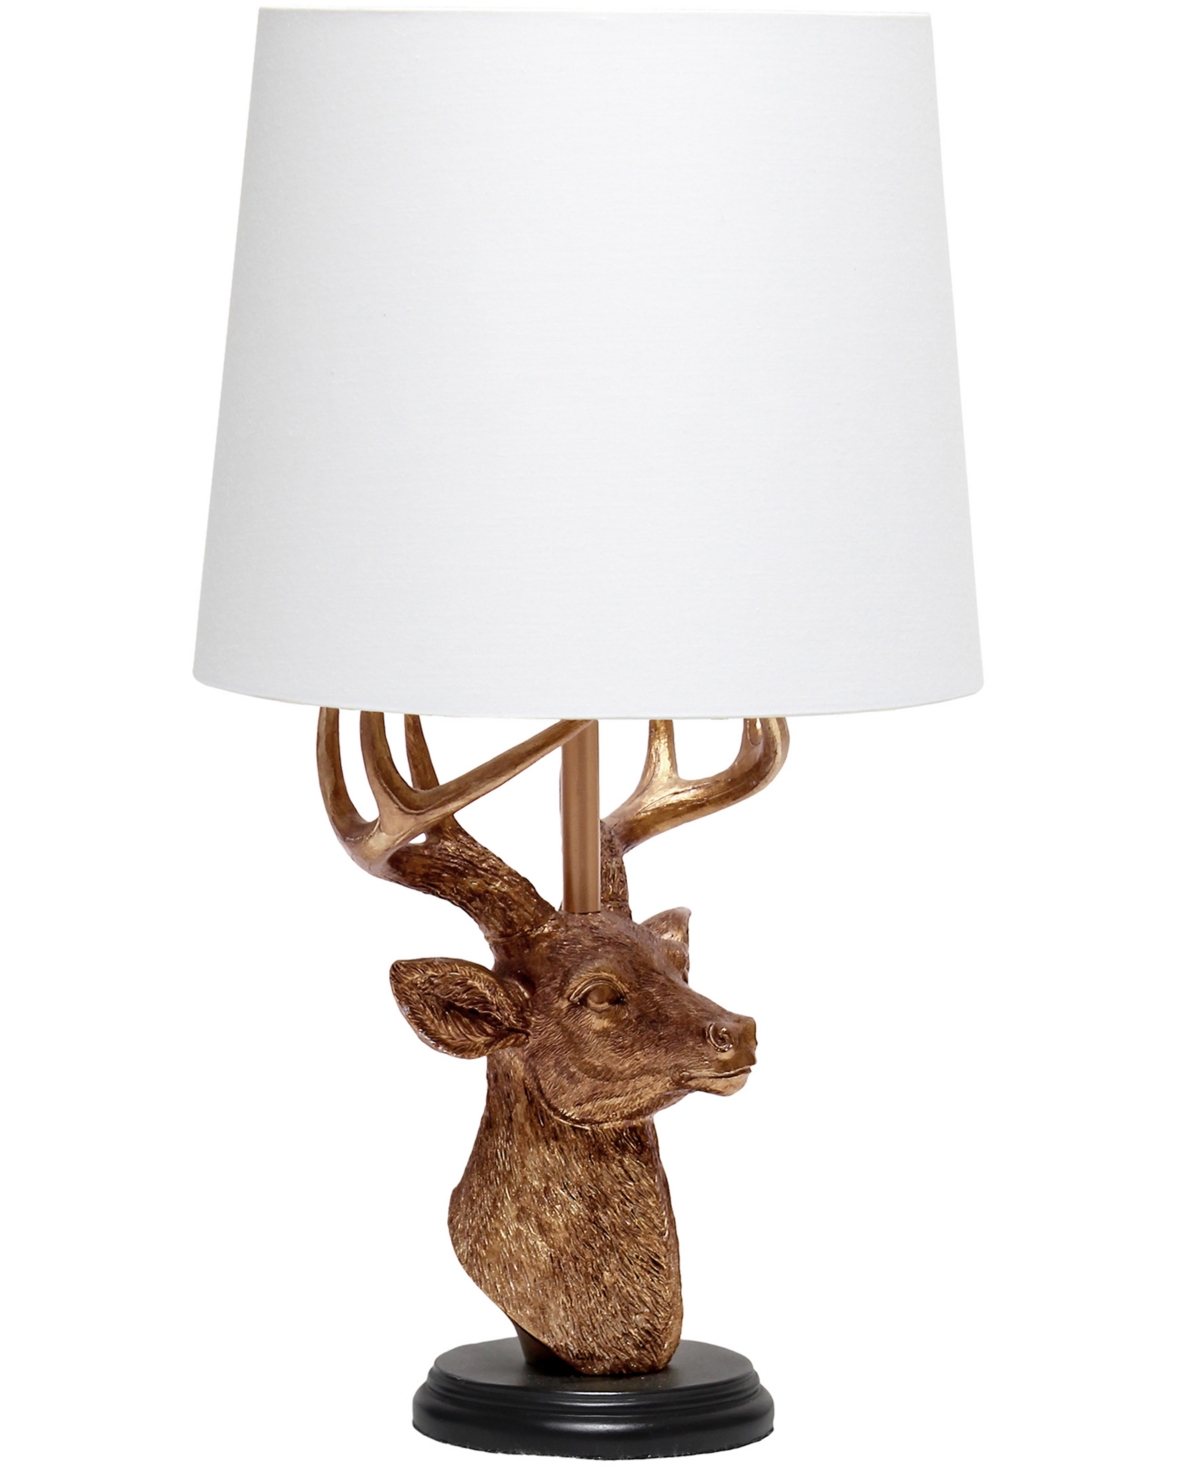 Shop Simple Designs Woodland 17.25" Tall Rustic Antler Copper Deer Bedside Table Desk Lamp With Tapered White Fabric Sha